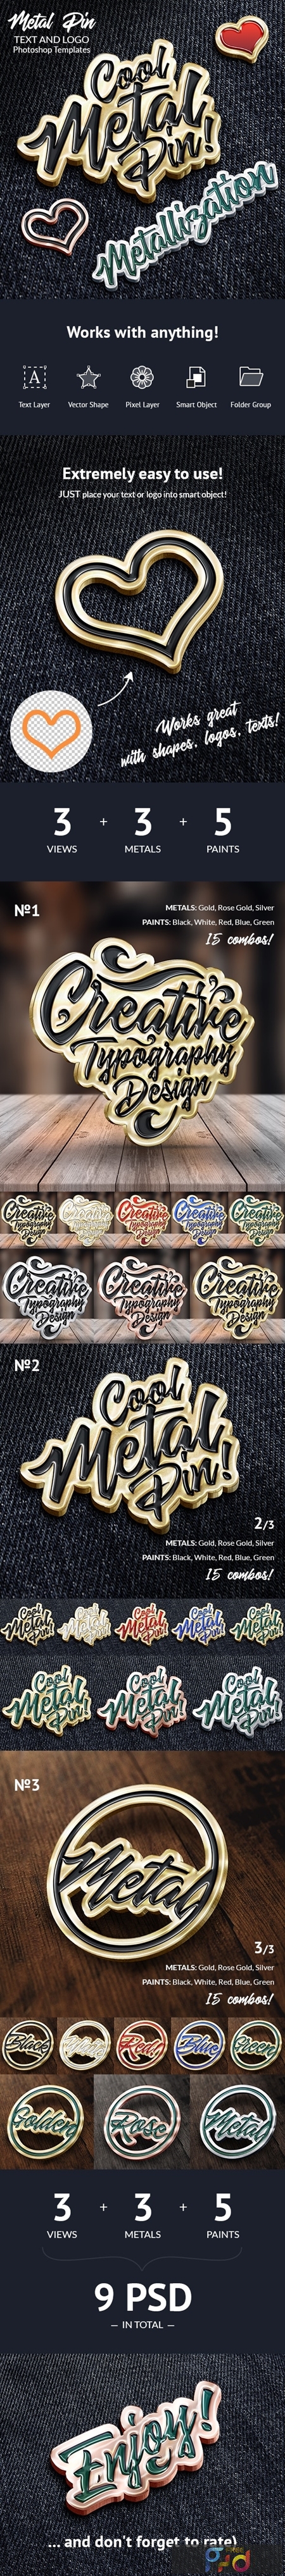 Metal Pin – Text and Logo Effect 24741564 1